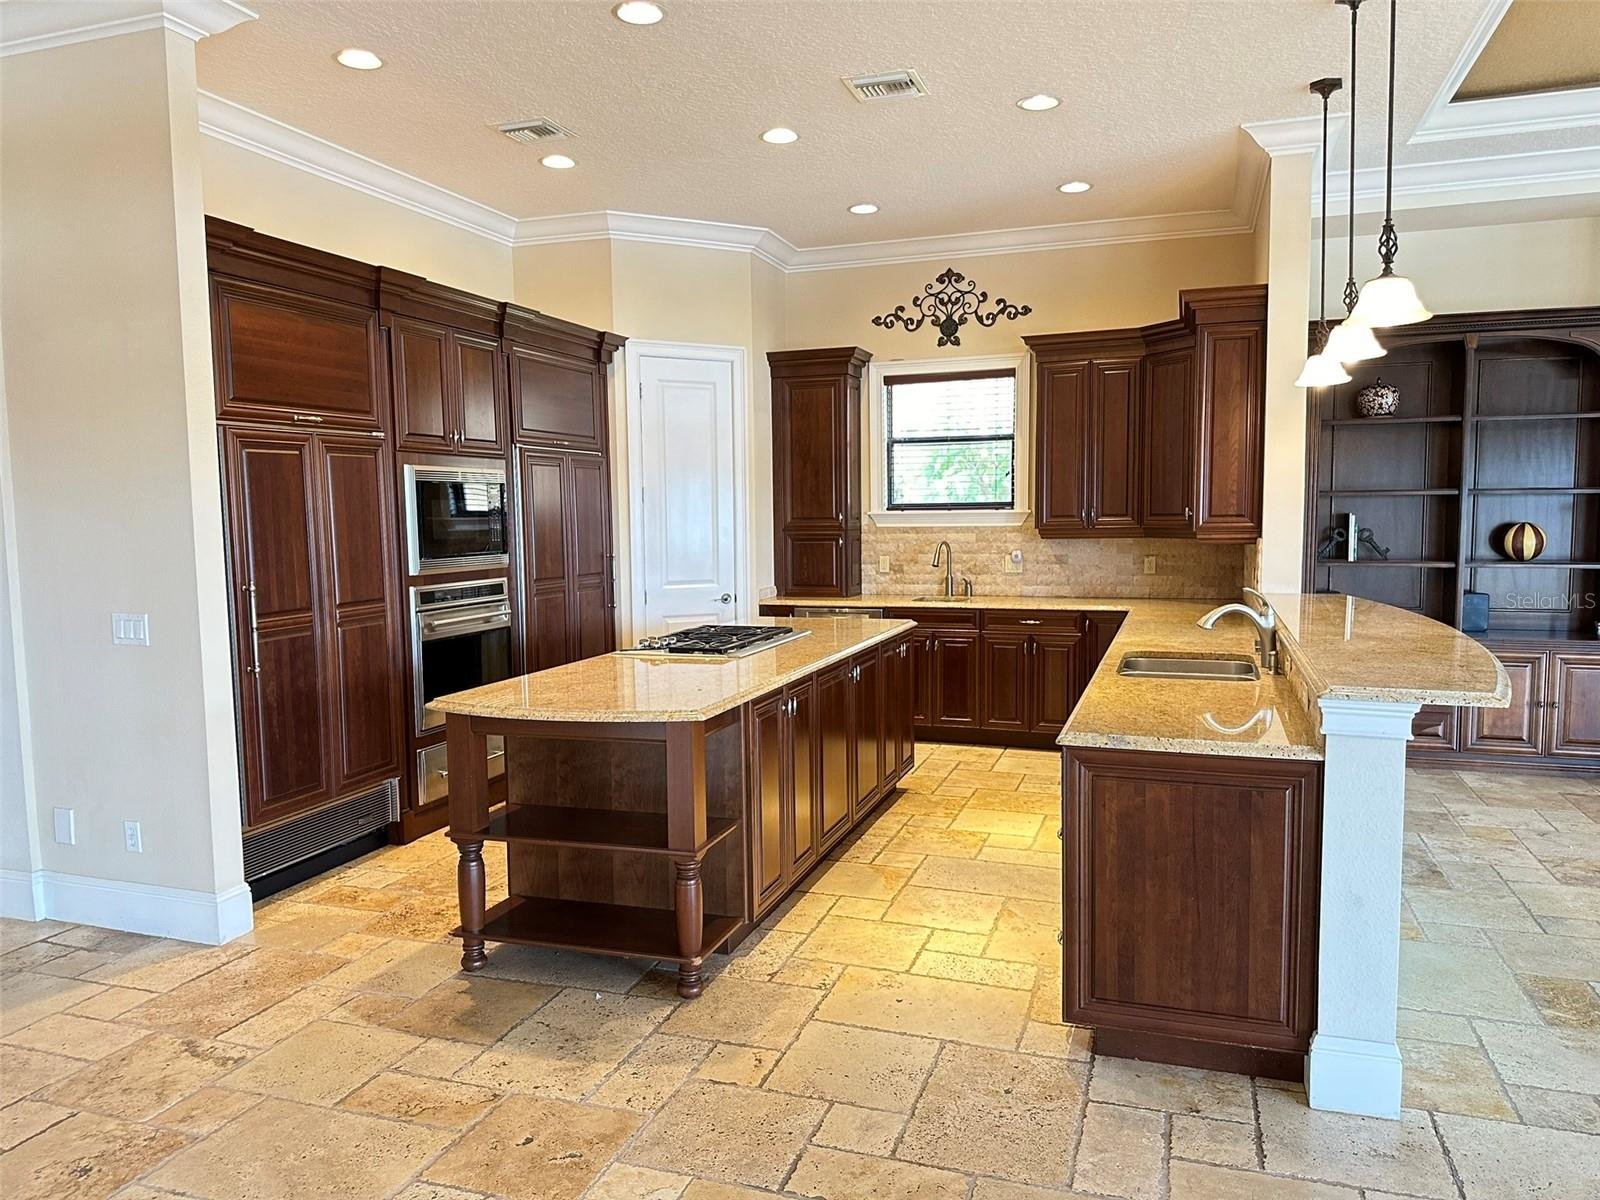 kitchen with wooden cabinets and large island